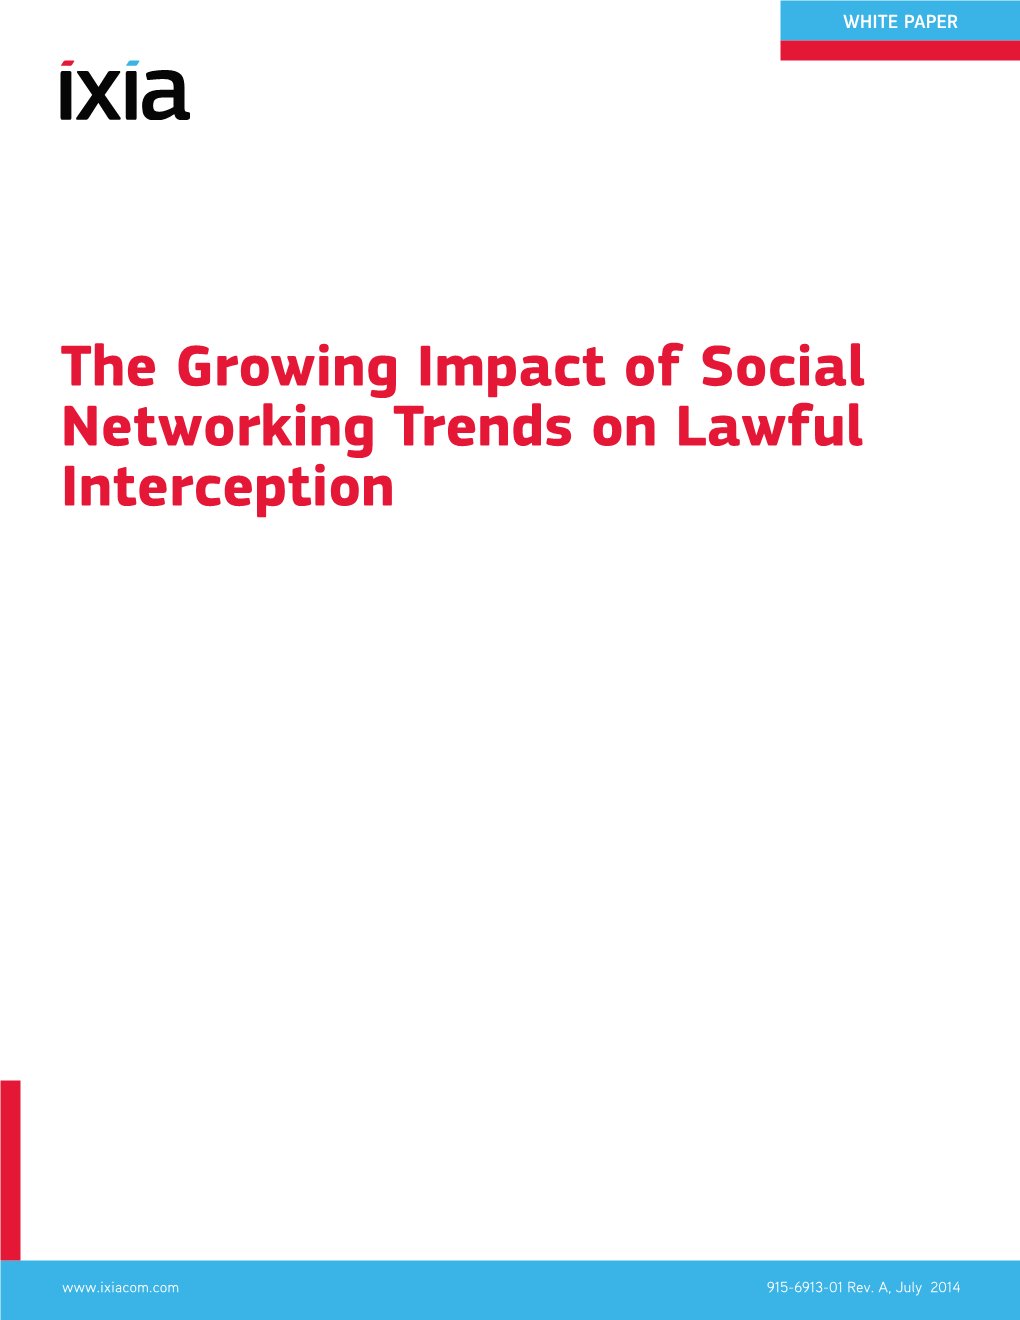 The Growing Impact of Social Networking Trends on Lawful Interception